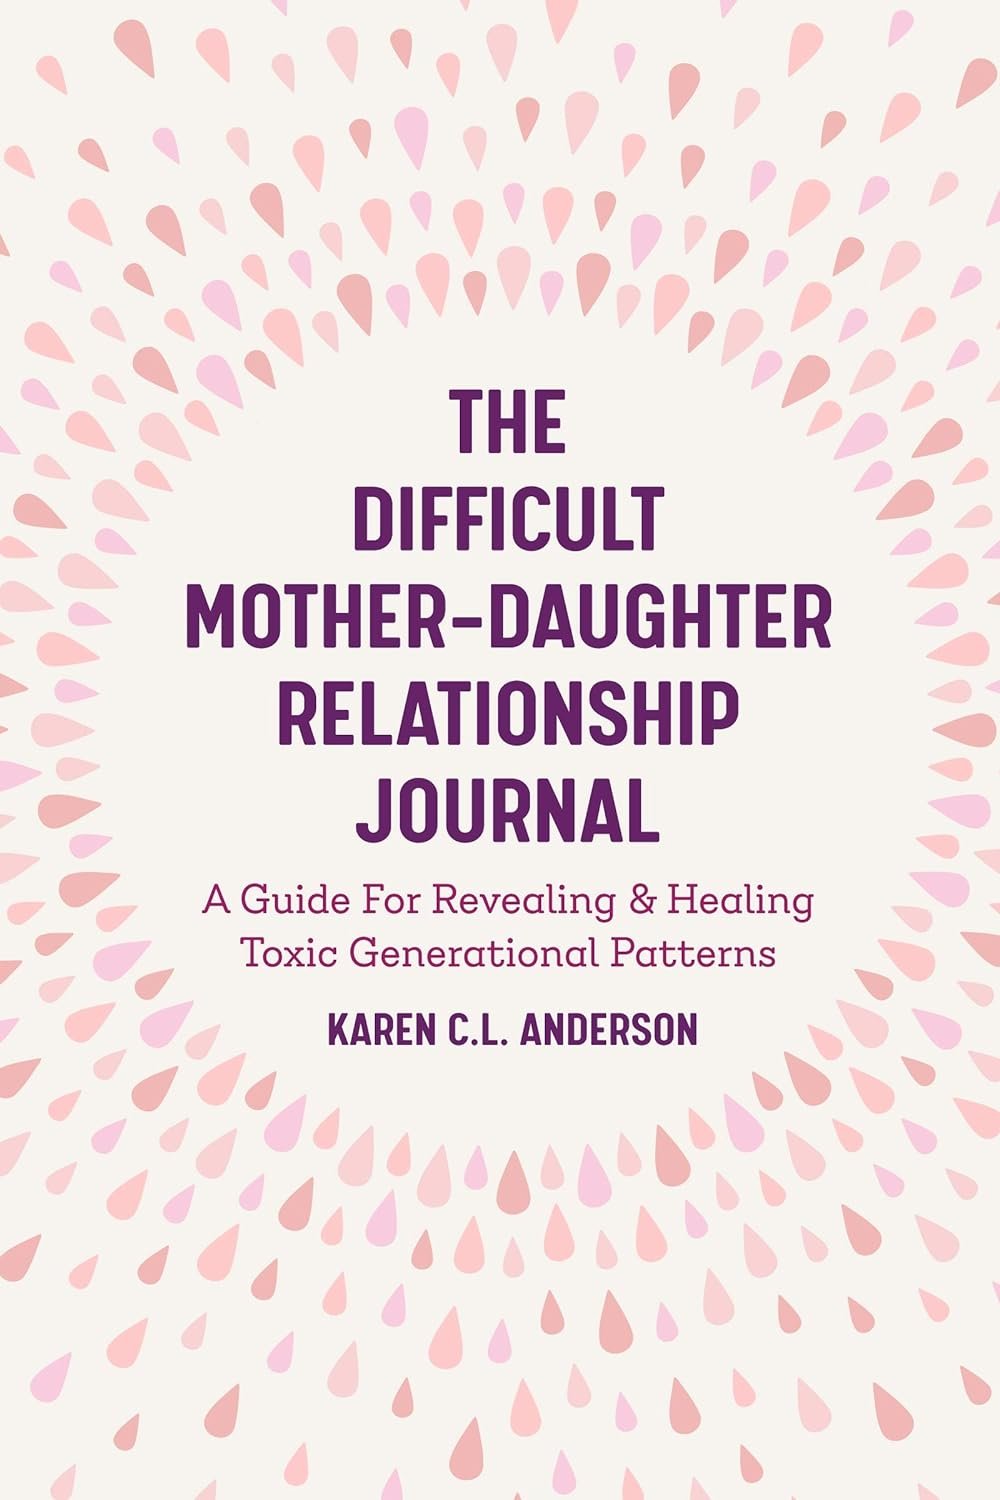  The Difficult Mother-Daughter Relationship Journal: A Guide For Revealing &amp; Healing Toxic Generational Patterns